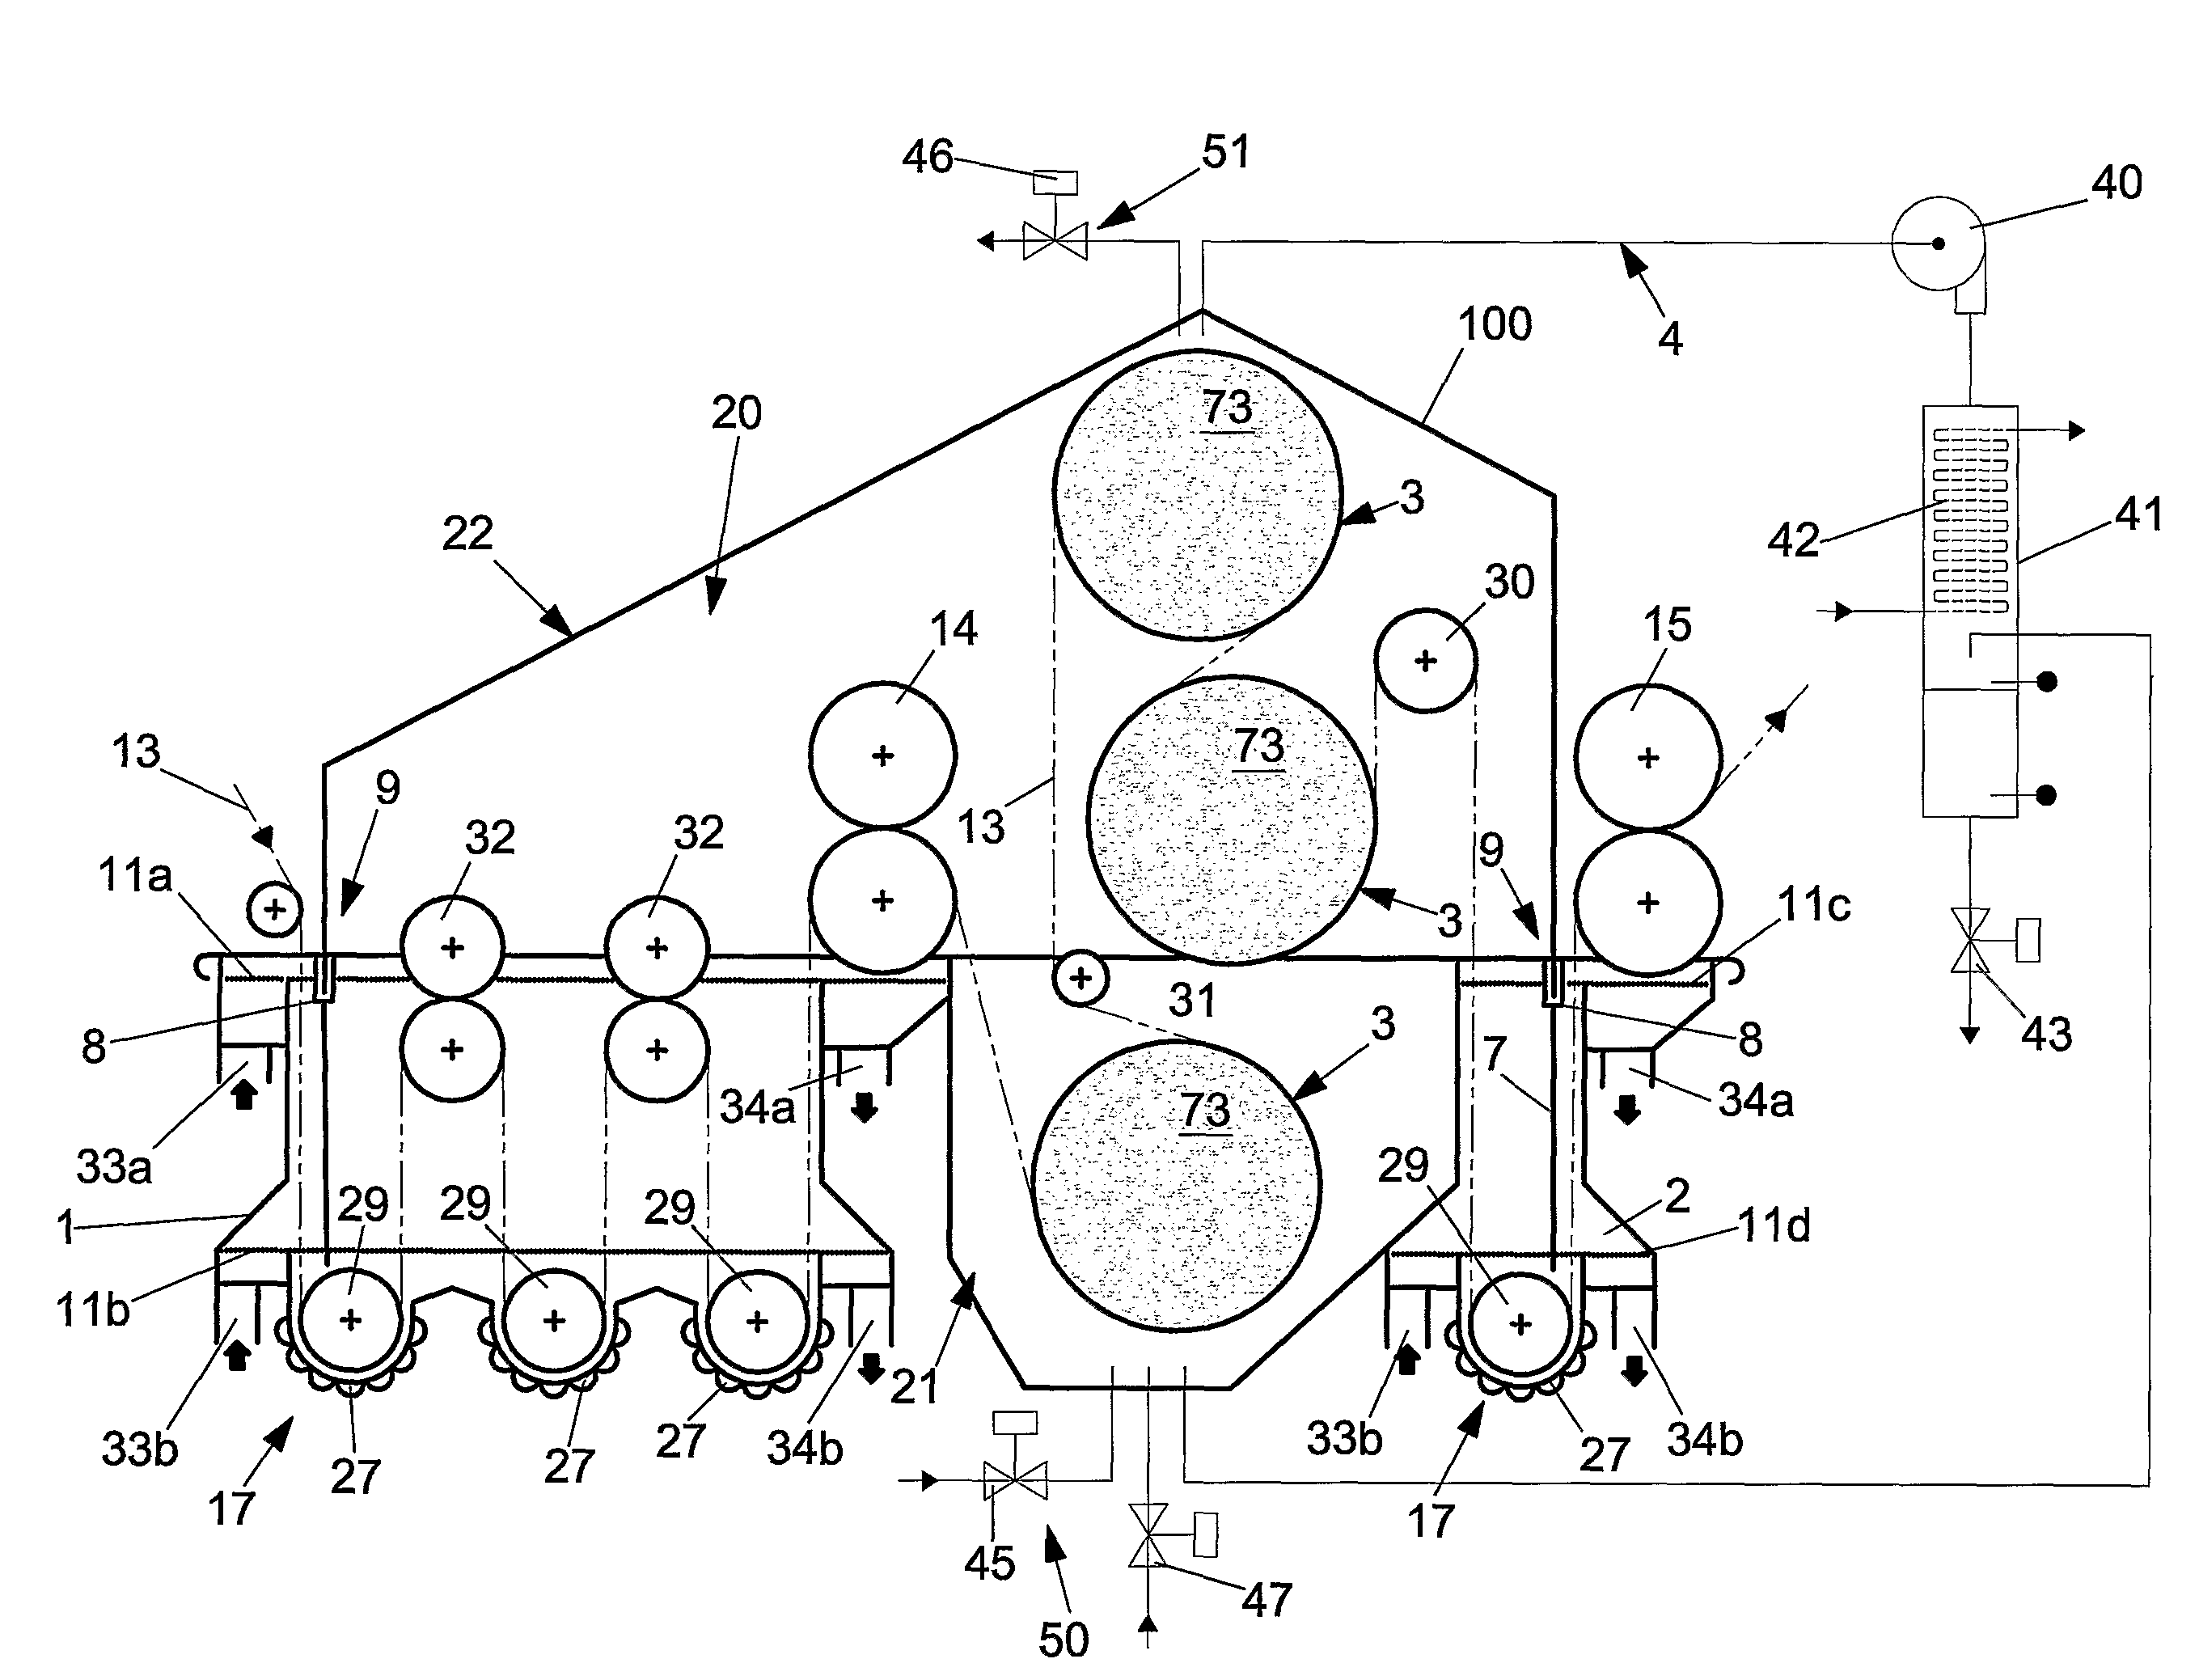 Dyeing device and process using indigo and other colorants